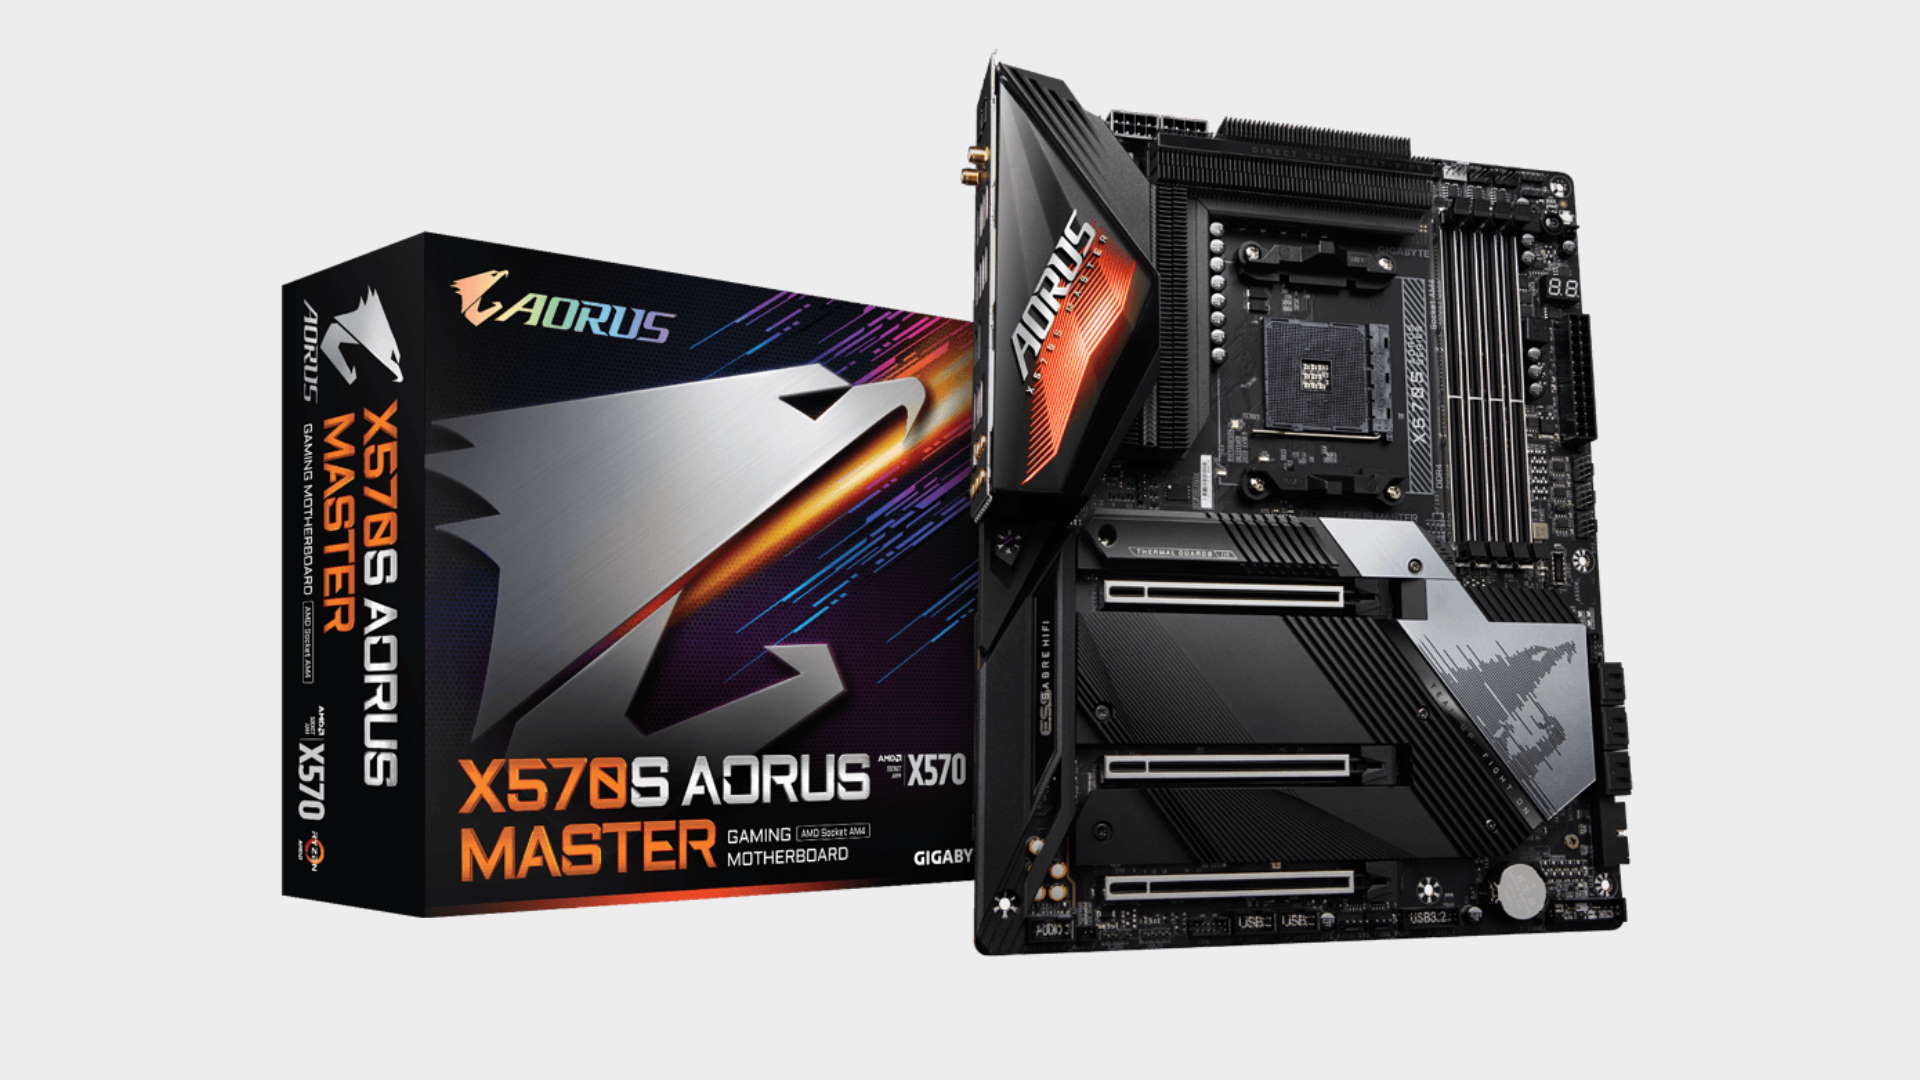 Gigabyte X570S Aorus Master AMD motherboard with packaging